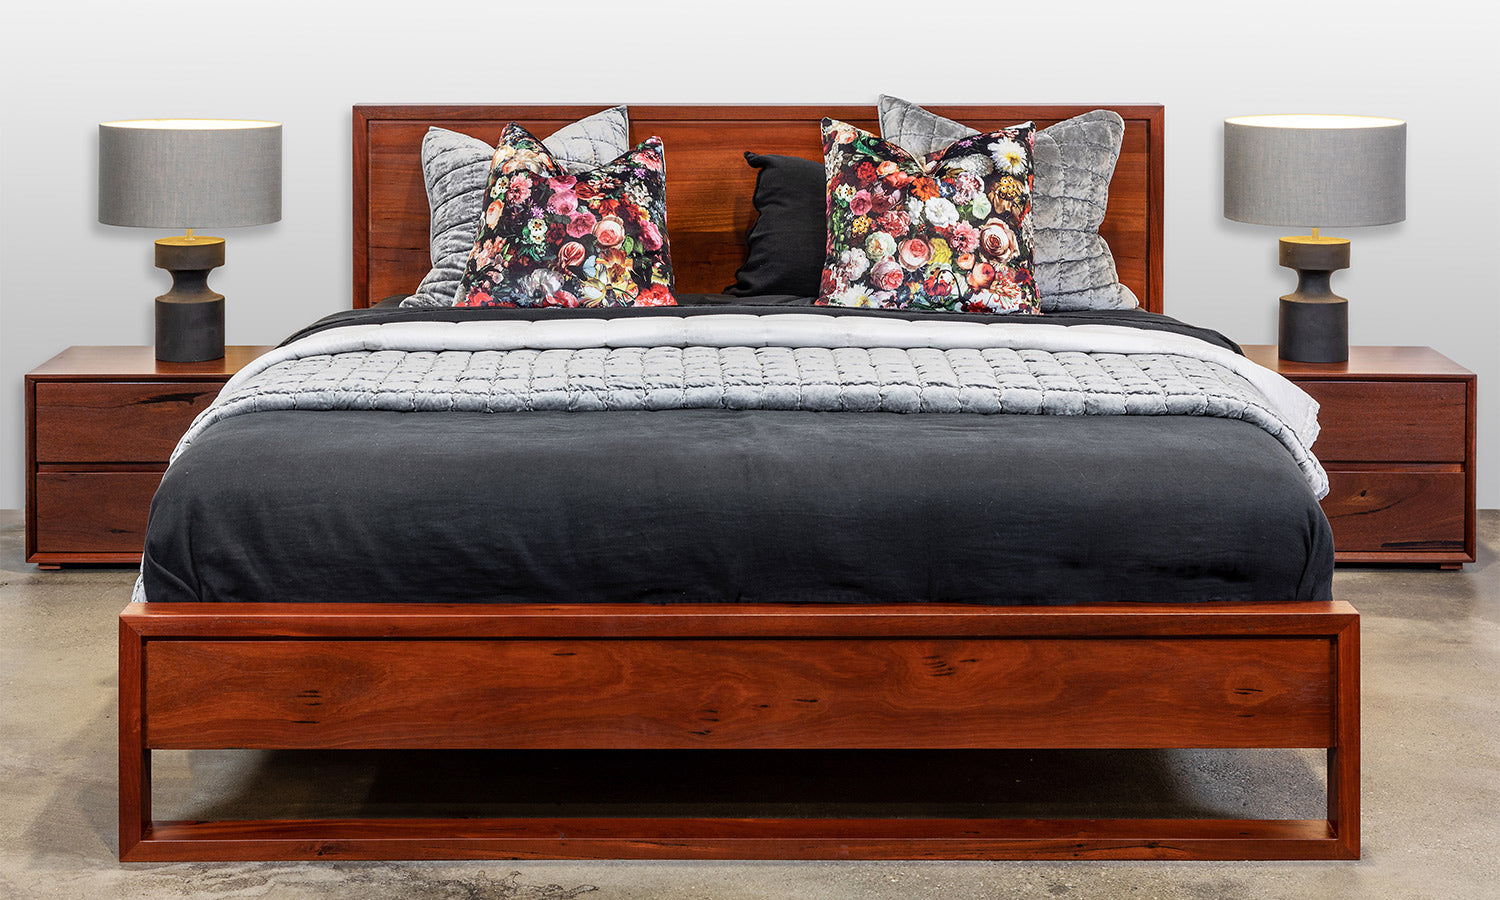 Apartment style solid jarrah timber wood king queen bed bedroom suite Perth WA